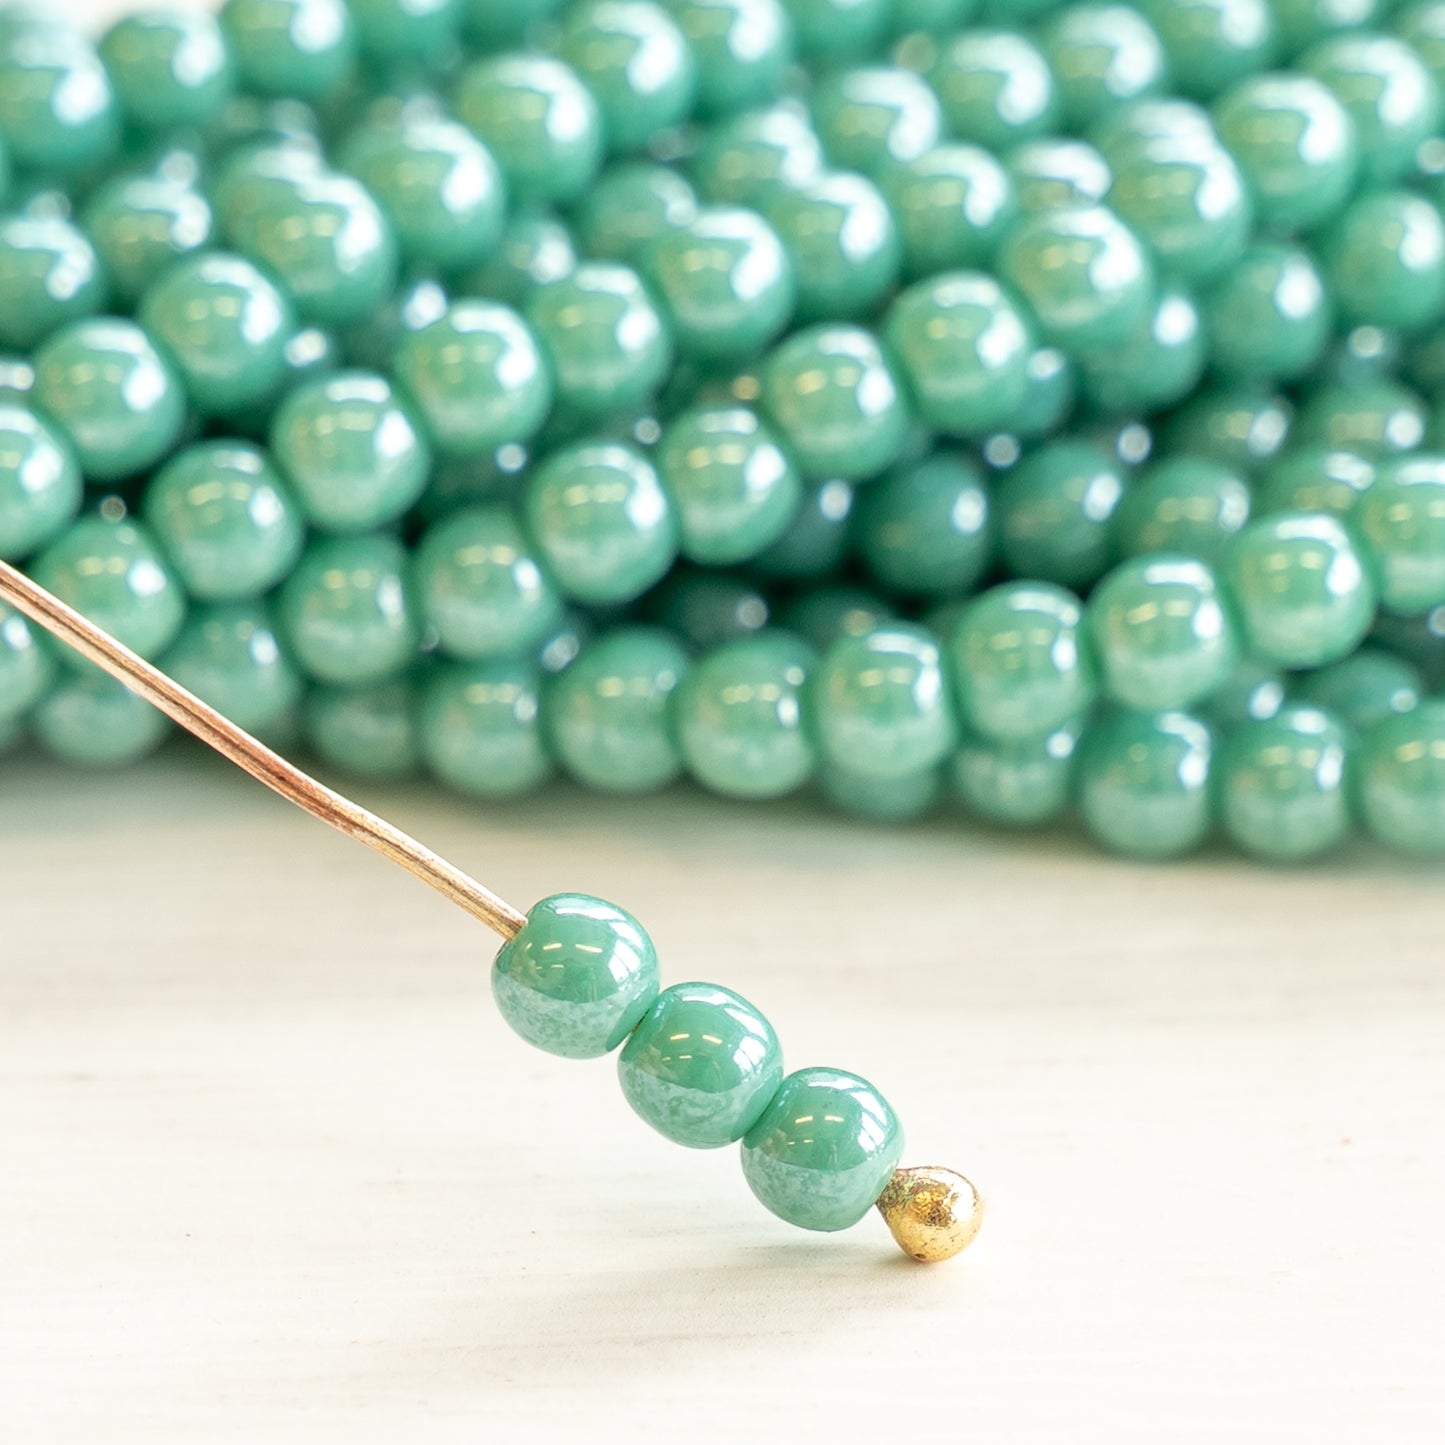 4mm Round Glass Beads - Opaque Turquoise Luster - 100 Beads